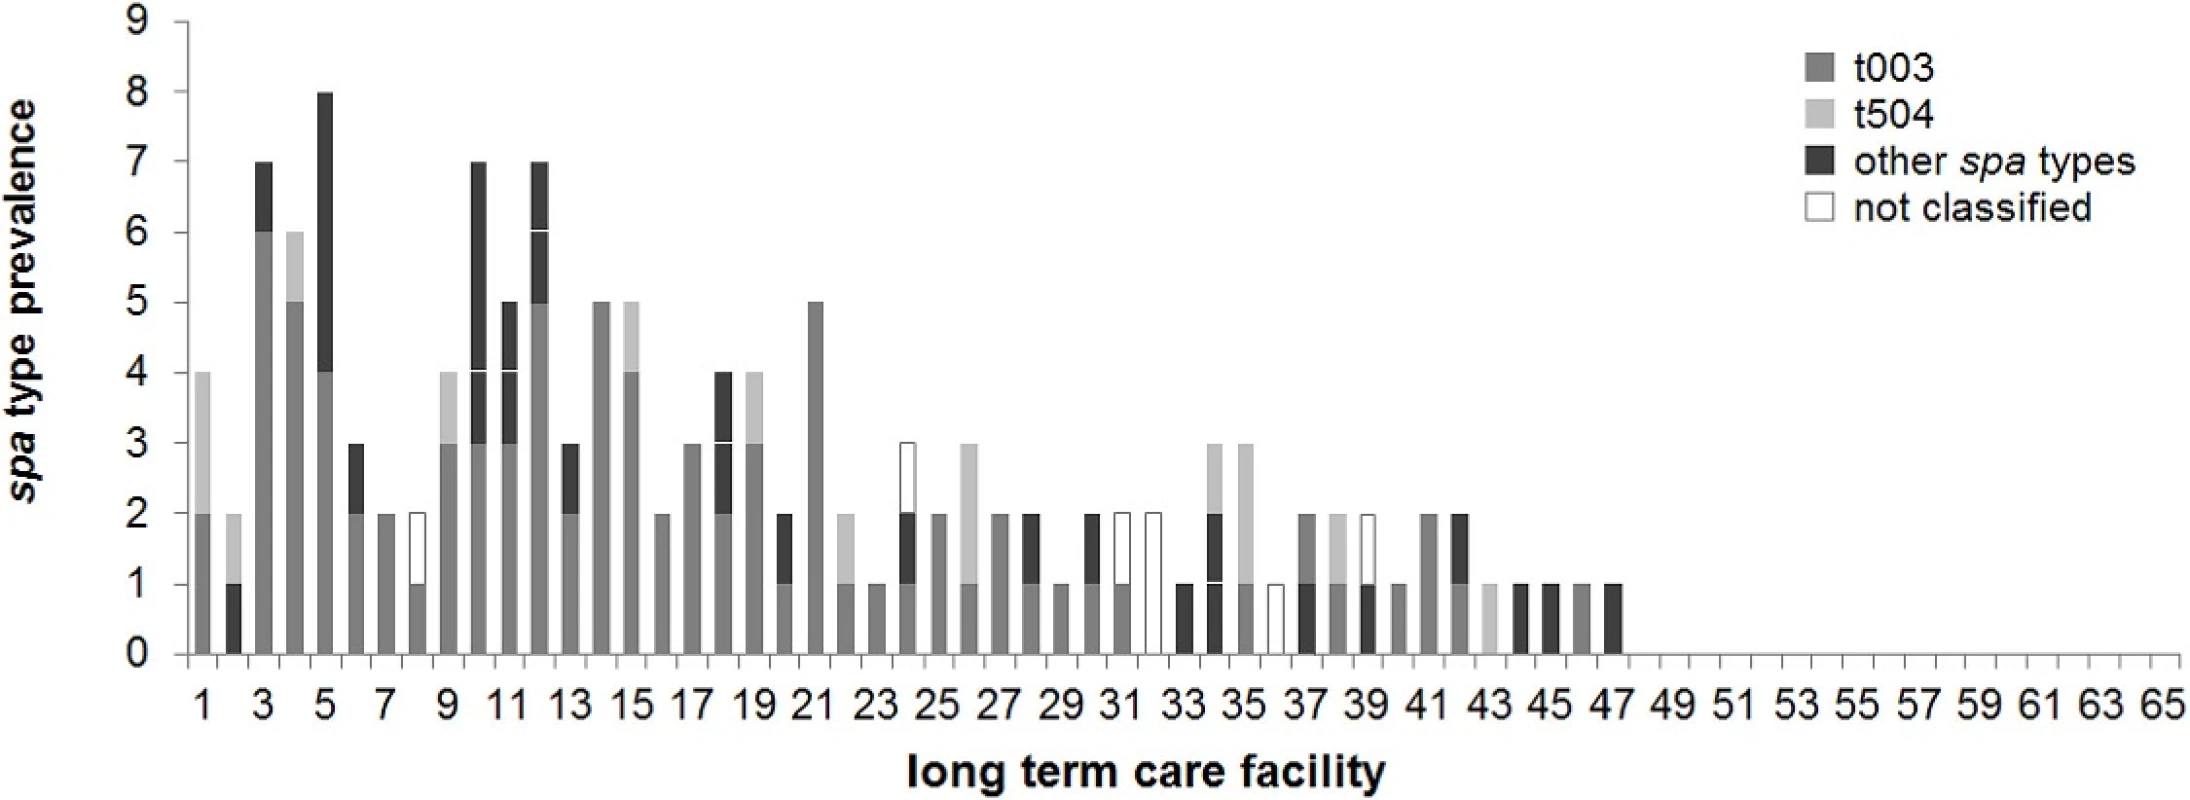 Prevalence of <i>spa</i> types in nursing homes in Saarland, Germany. The number of different <i>spa</i> types is given per LTCF (identical numbering as in Fig 1). <i>spa</i> type t003 (grey), t504 (light grey), not classified <i>spa</i> types (white), other <i>spa</i> types (black).